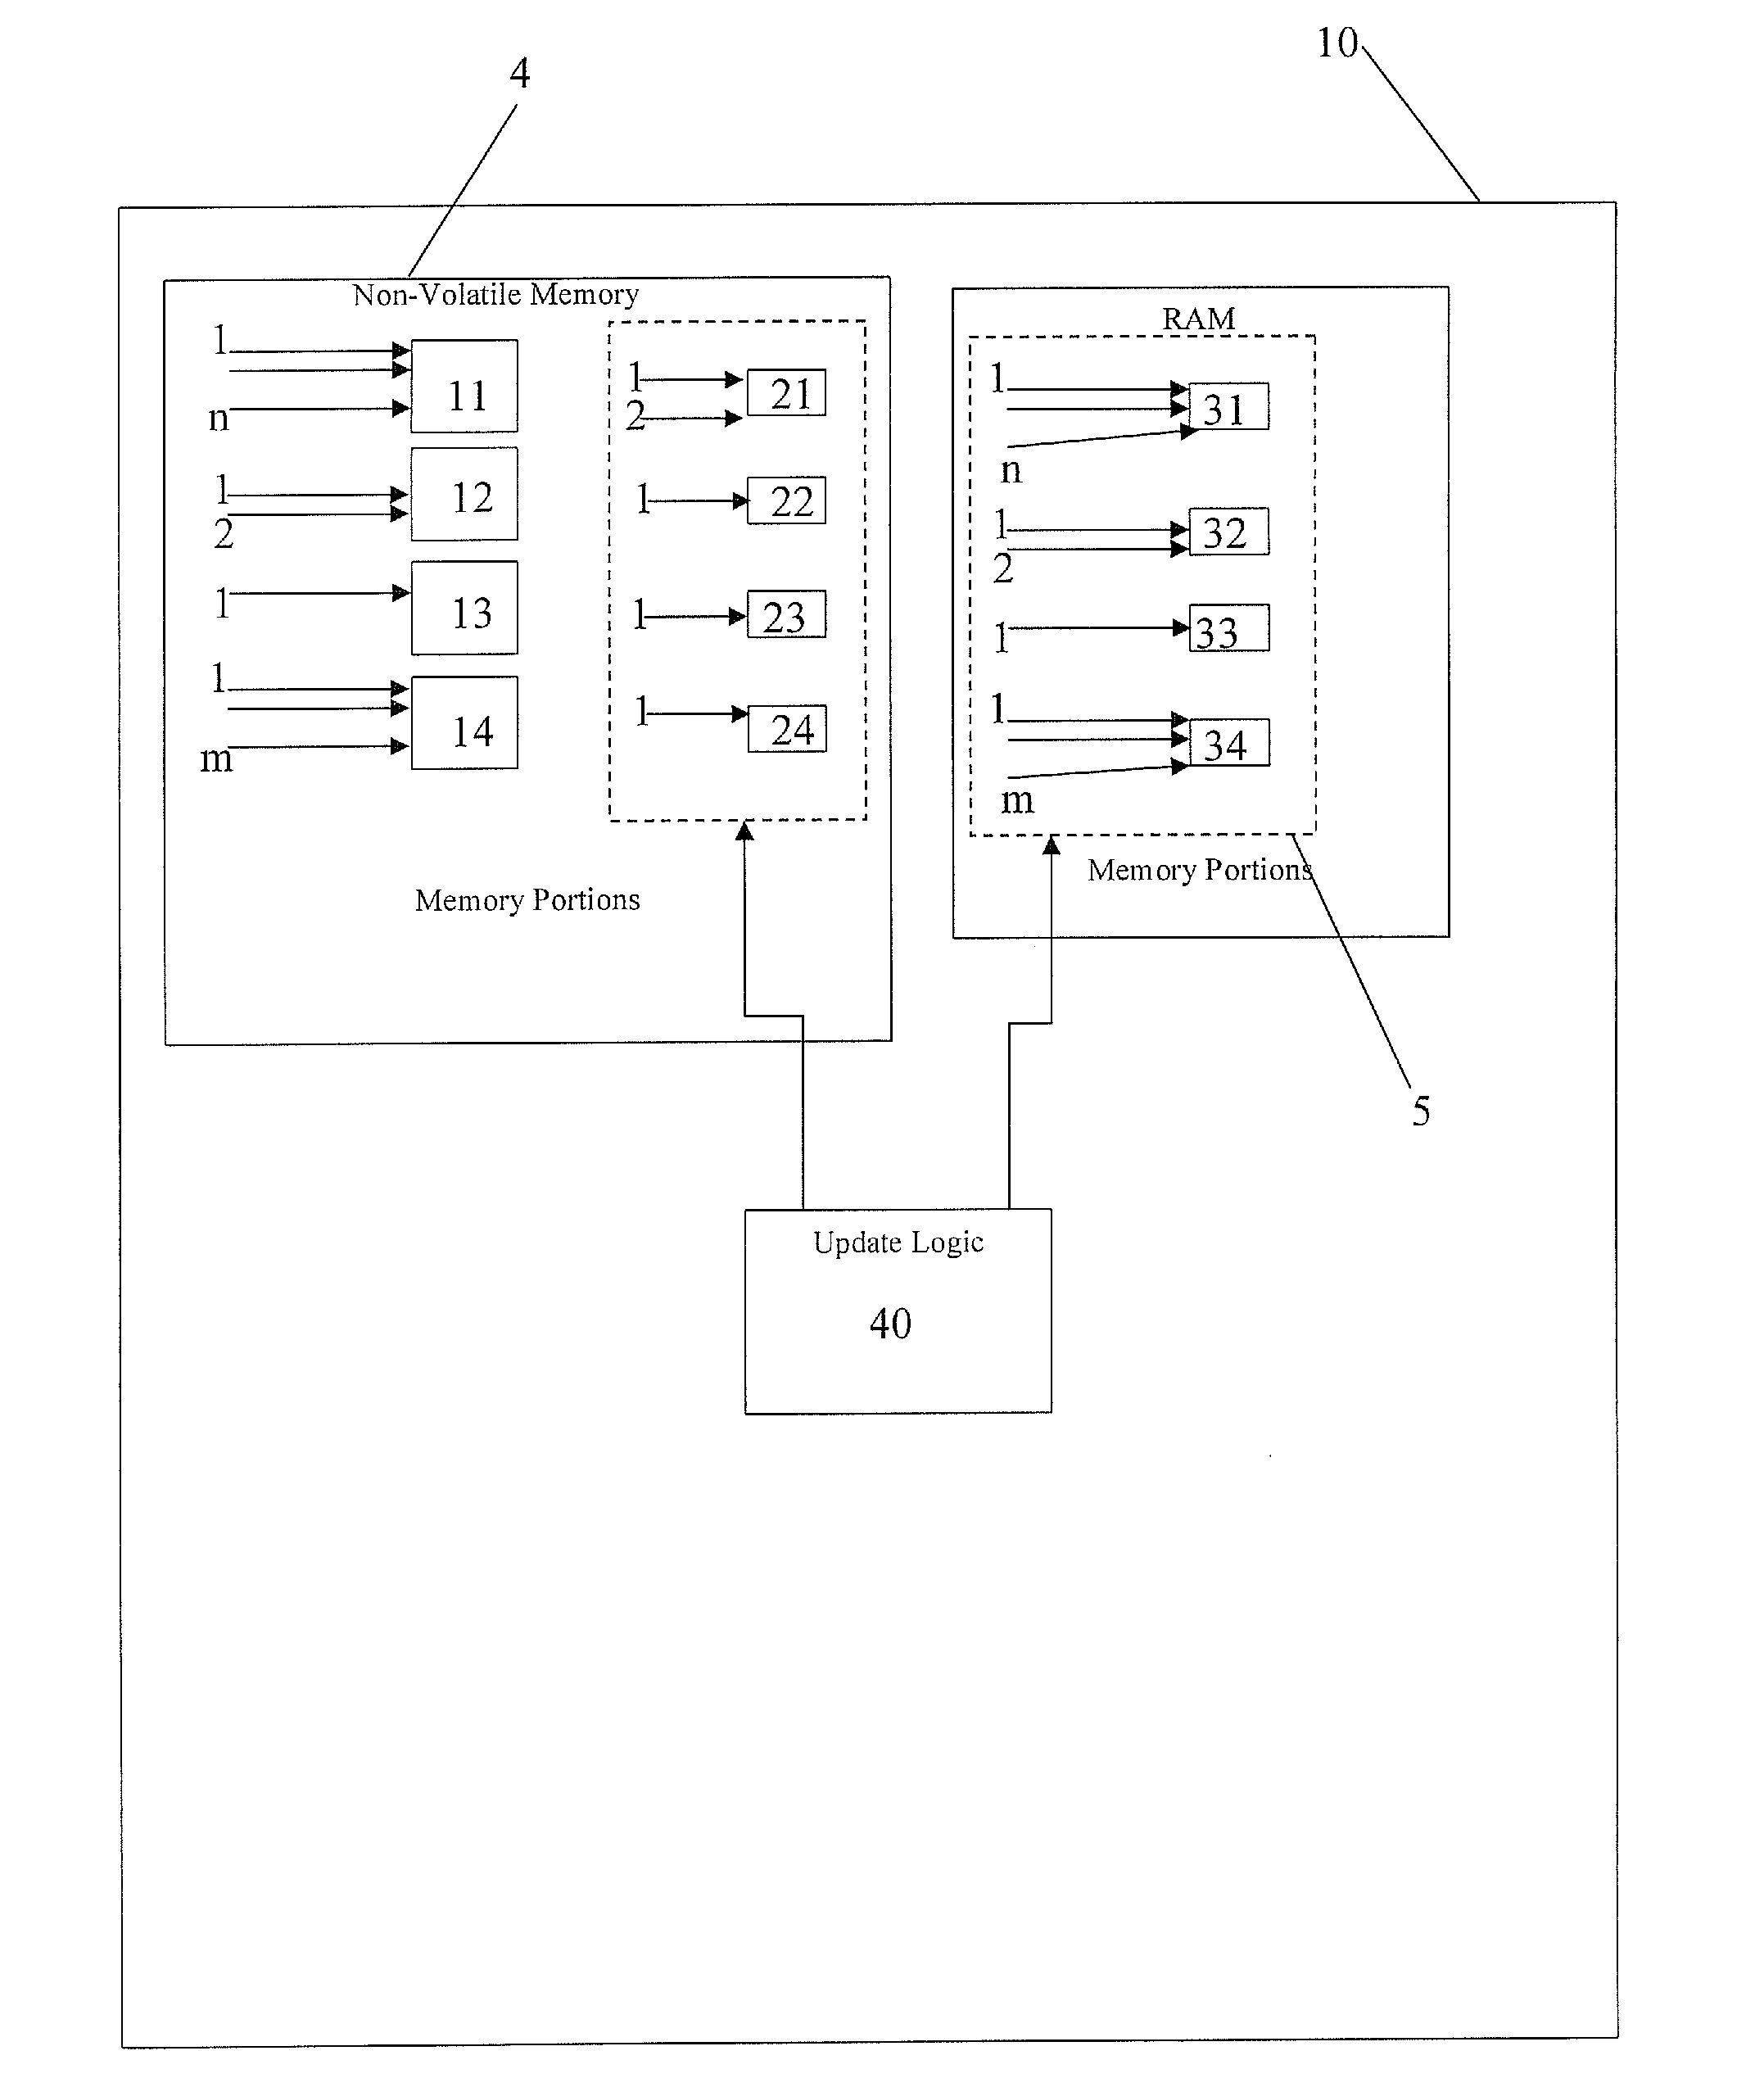 Method and system for improving a control of a limit on writing cycles of an IC card